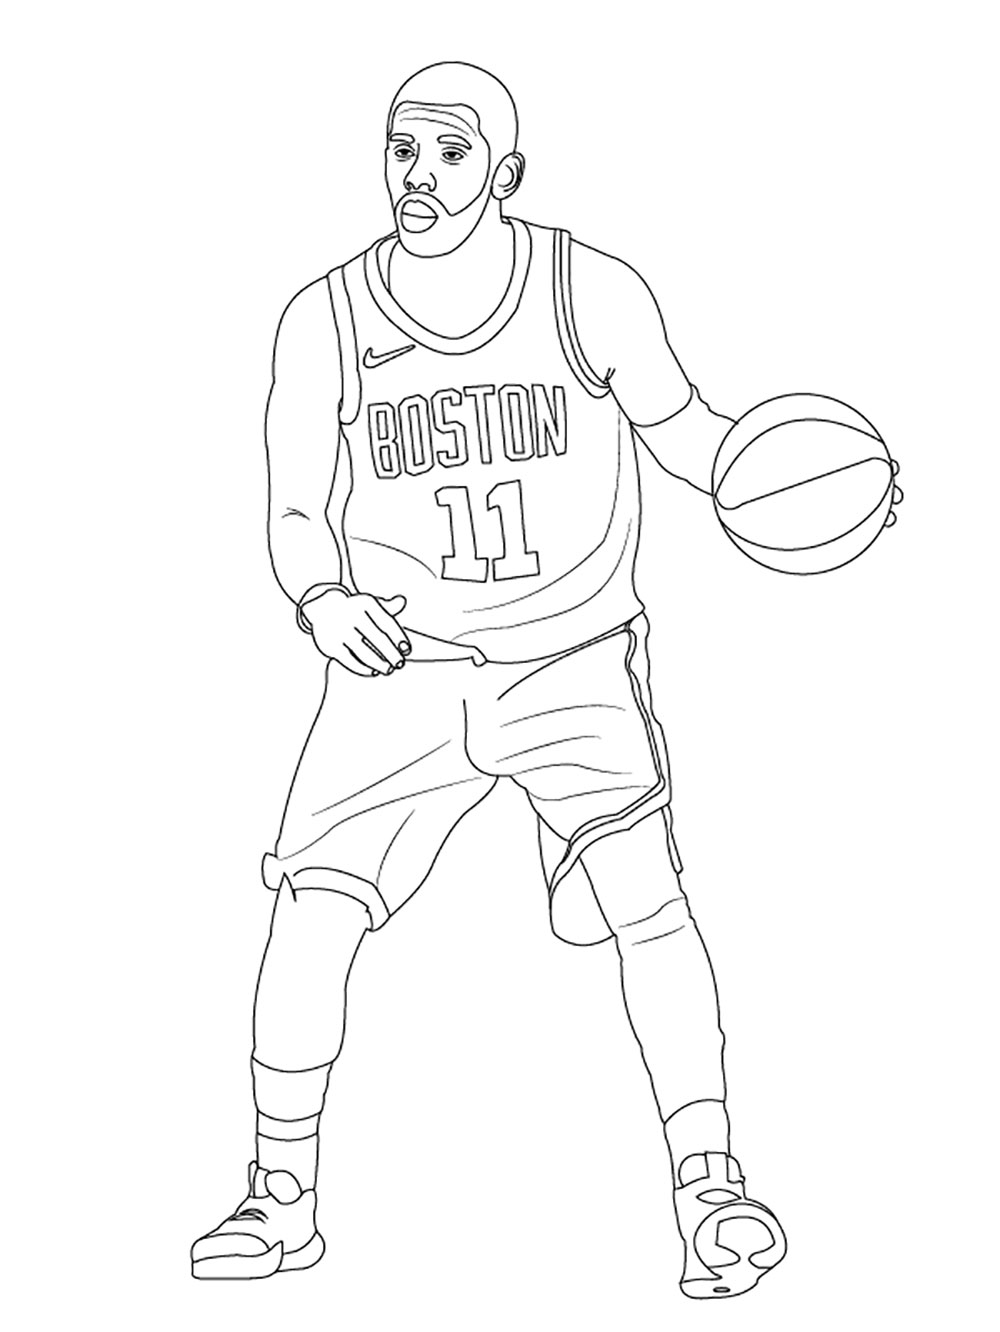 Kyrie Irving coloring pages